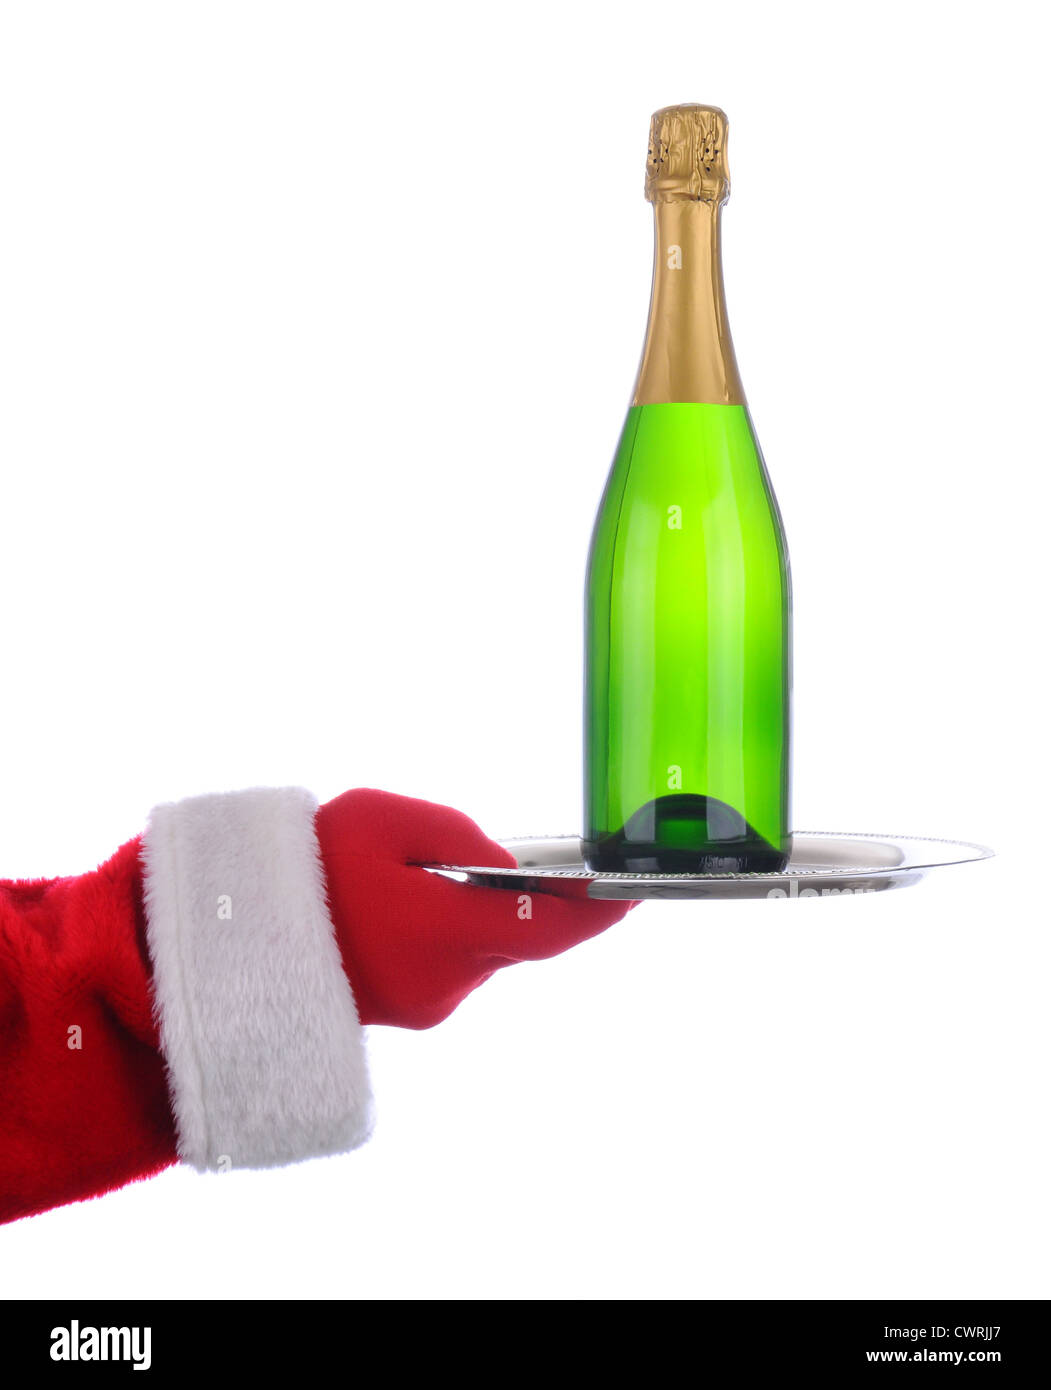 Santa Claus outstretched arm holding a Champagne Bottle on a serving tray. Vertical format over a white background. Stock Photo